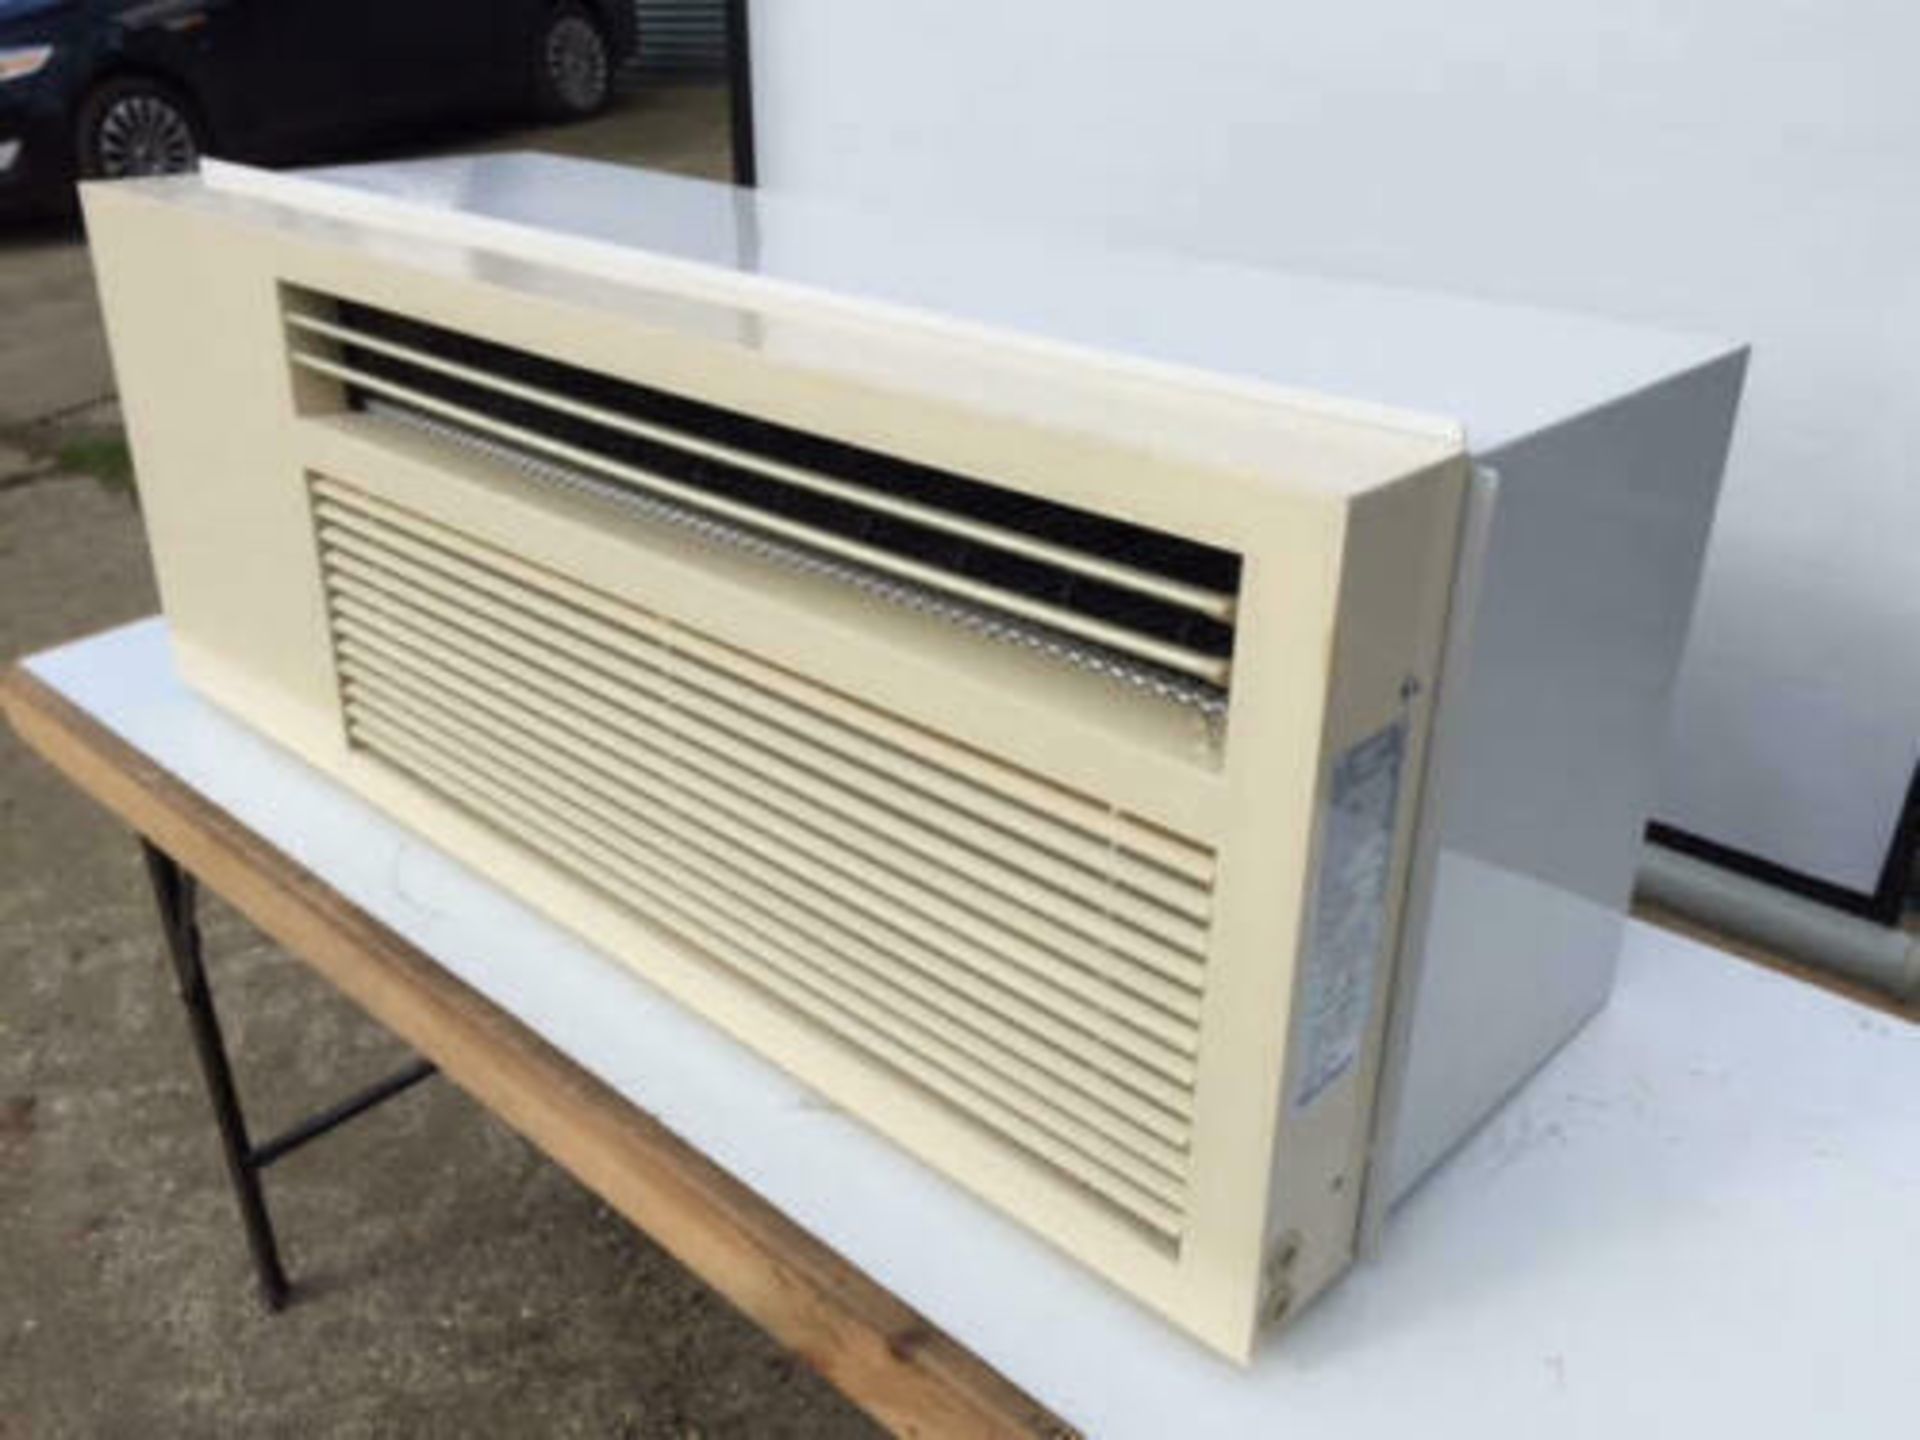 1 x Eco Air Conditioning Heat Pump through wall unit. Brand new, boxed and sealed - Image 8 of 9